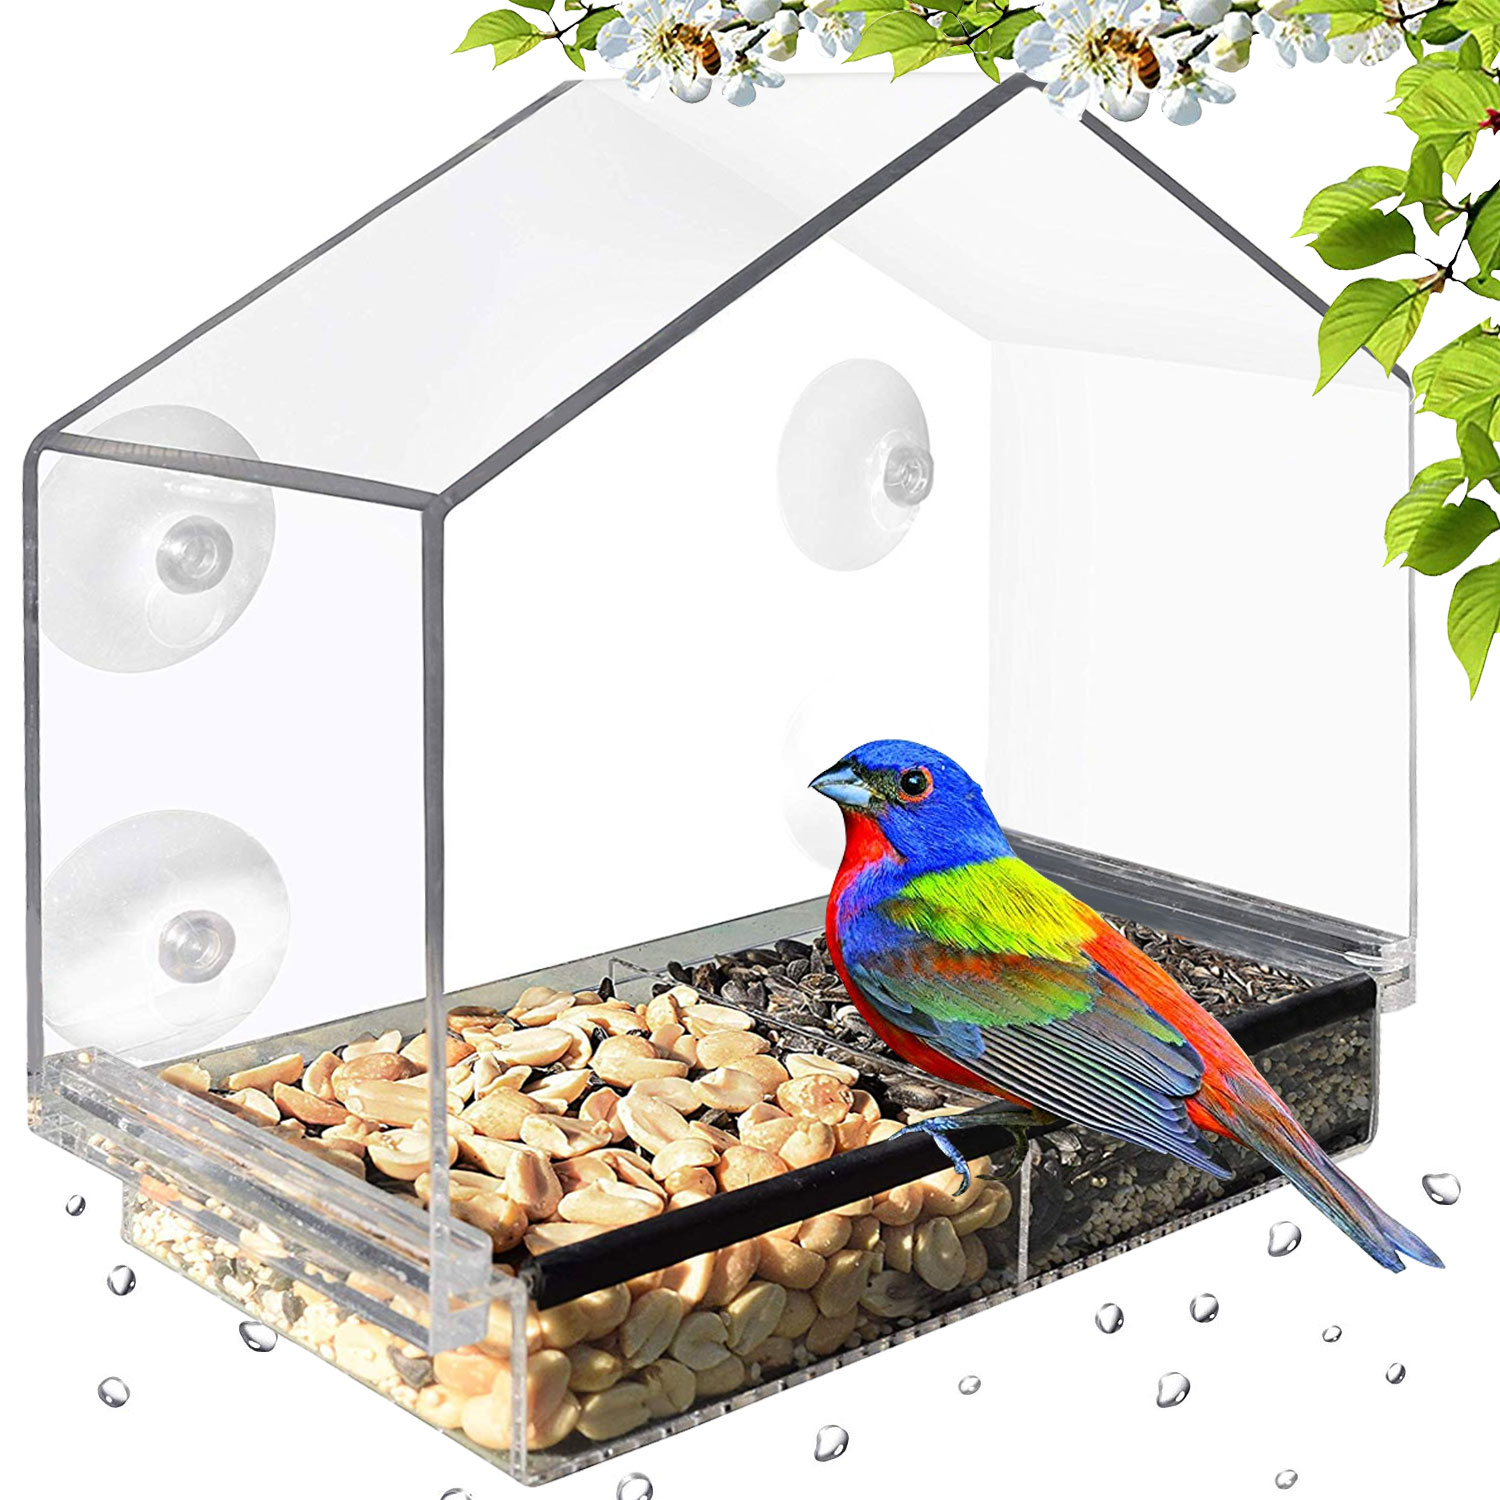 TITE Window Bird Feeder with Strong Suction Cups Clear Acrylic Wild Bird Feeders with Drain Holes for Outside Hanging Birdfeeders Kits Small Compact Outdoor Birdfeeders for Wild Birds